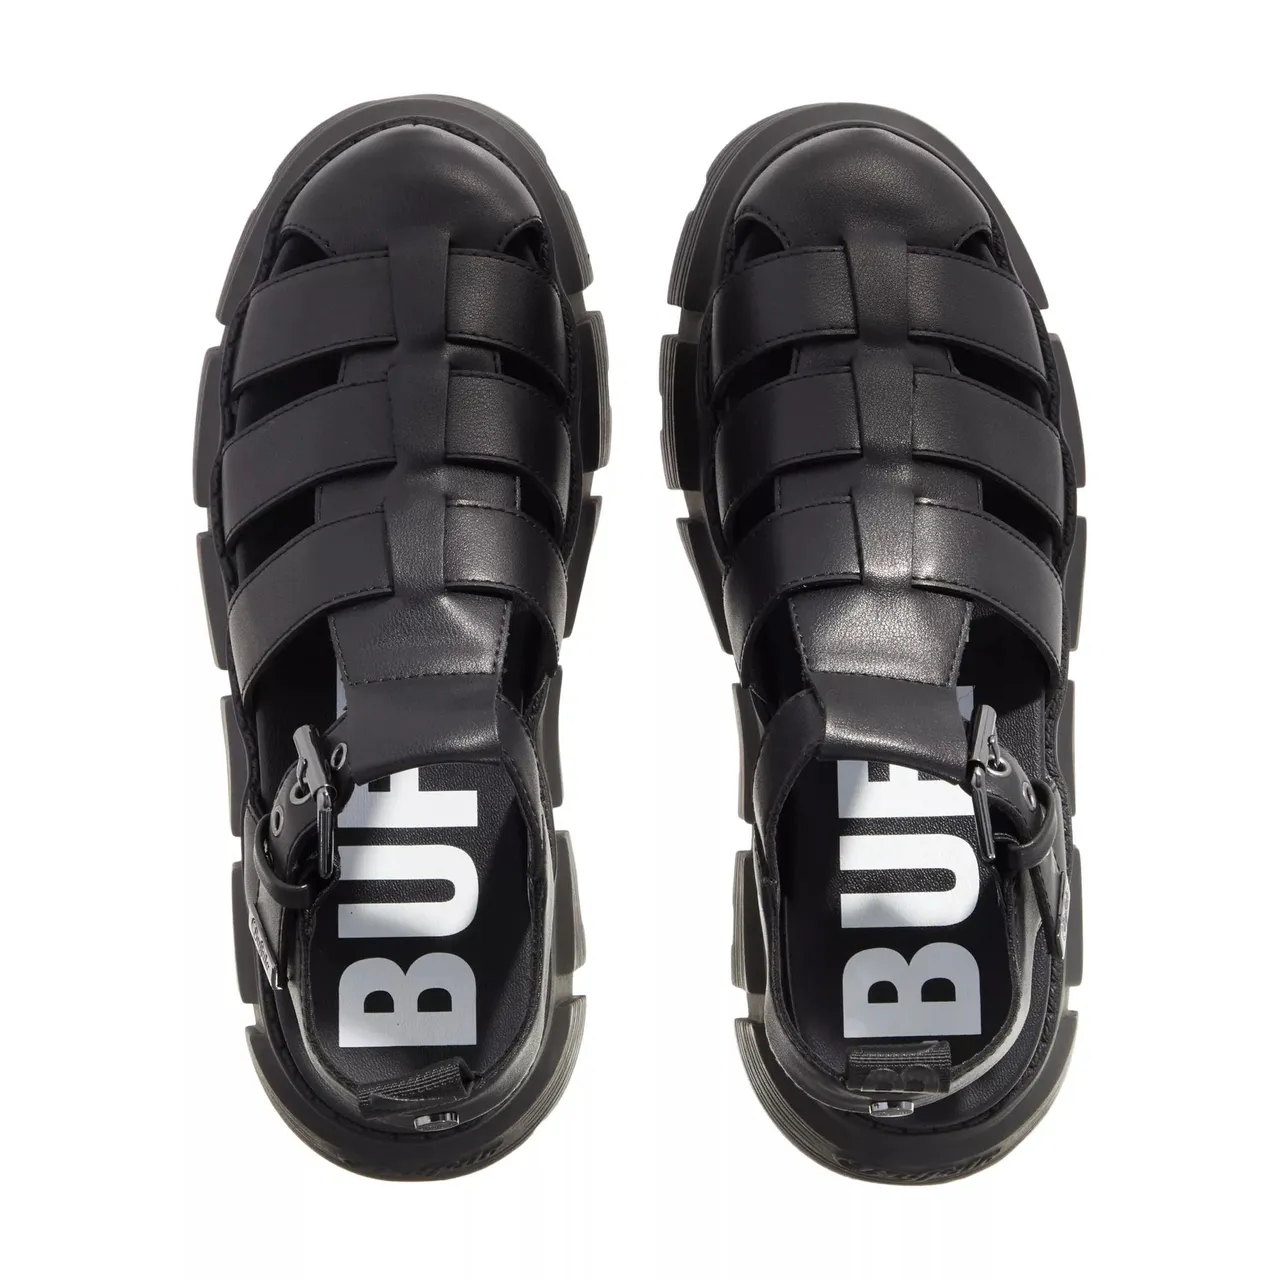 Buffalo Sandals - Ava Fisher - black - Sandals for ladies